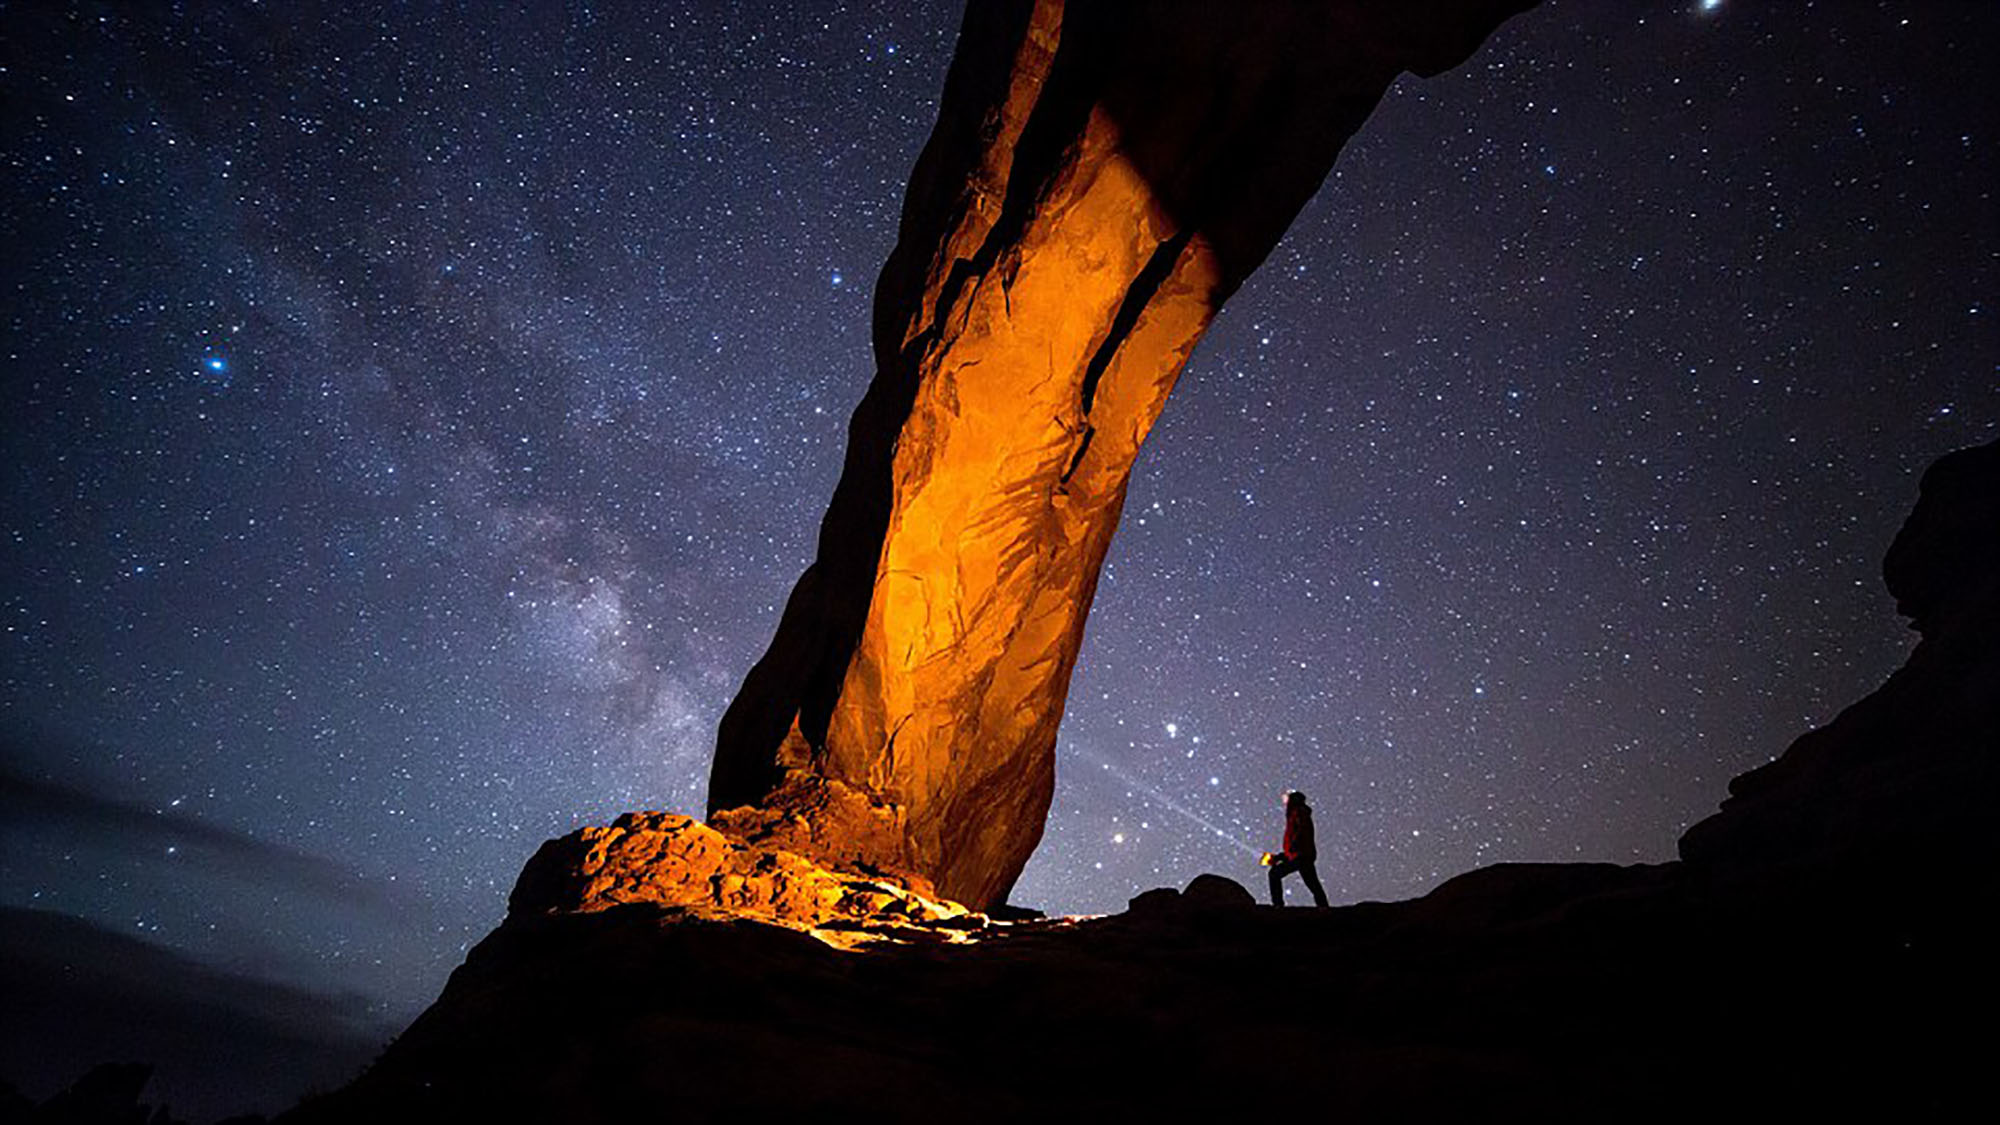 The spectacular photos submissions vying for National Geographic’s